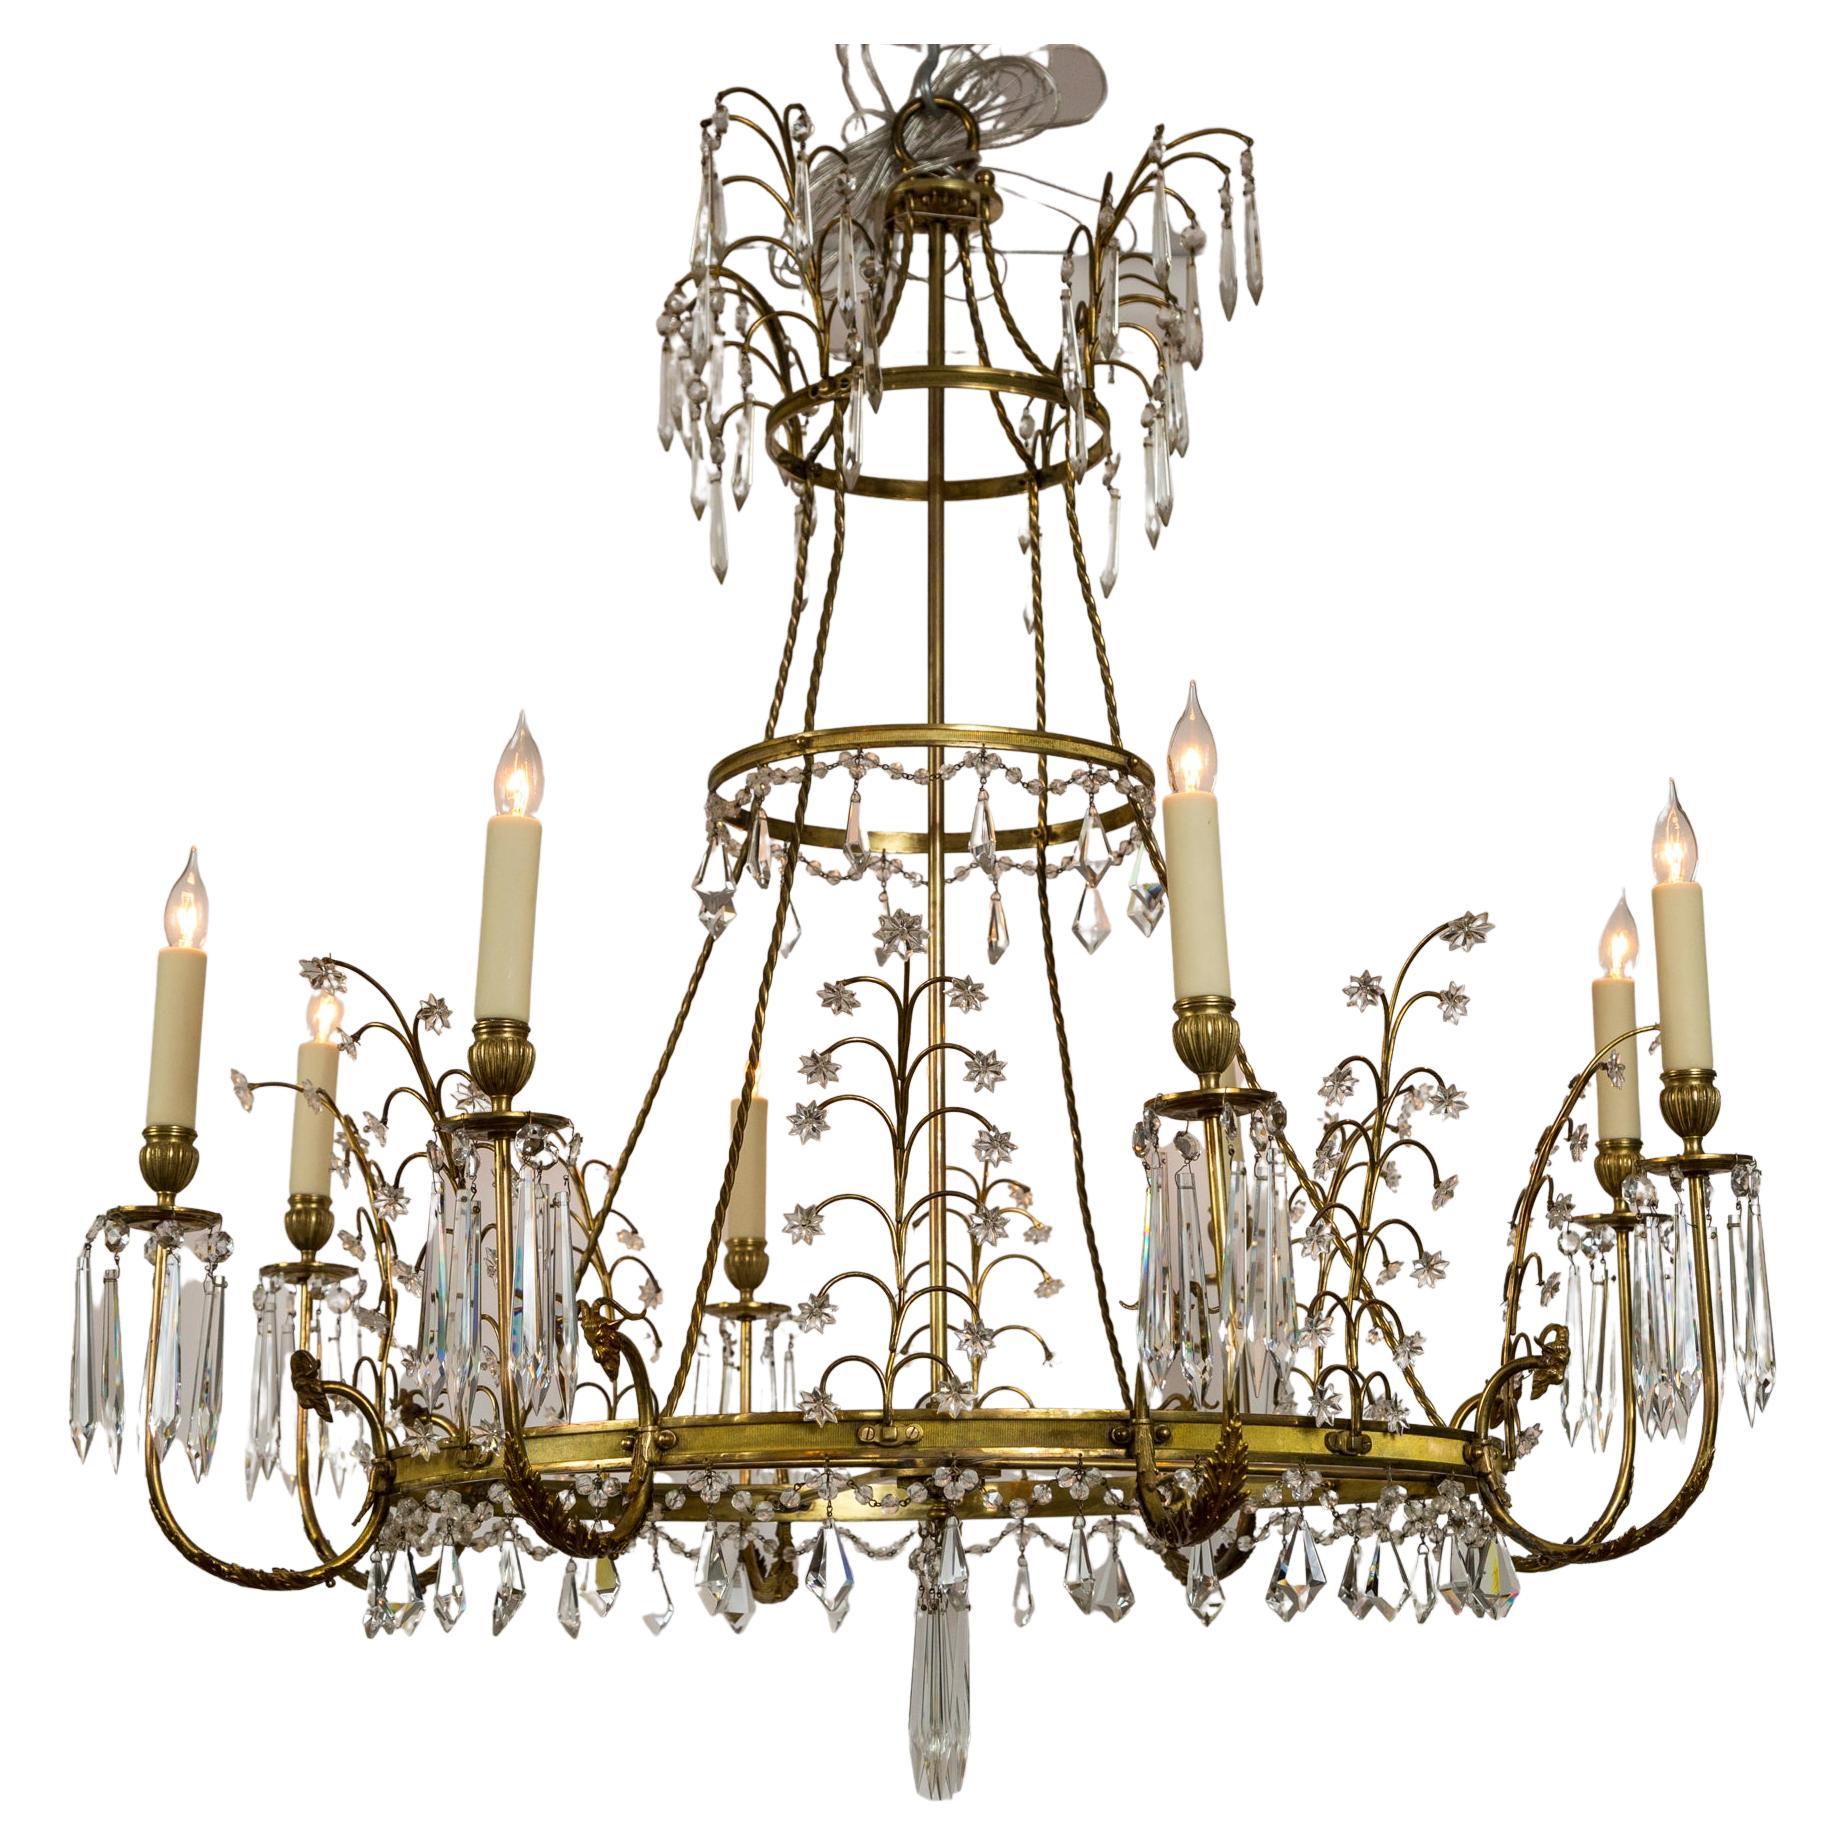 Neoclassical Revival Early 20th Century Baltic Russian Neoclassical Brass and Crystal Chandelier For Sale